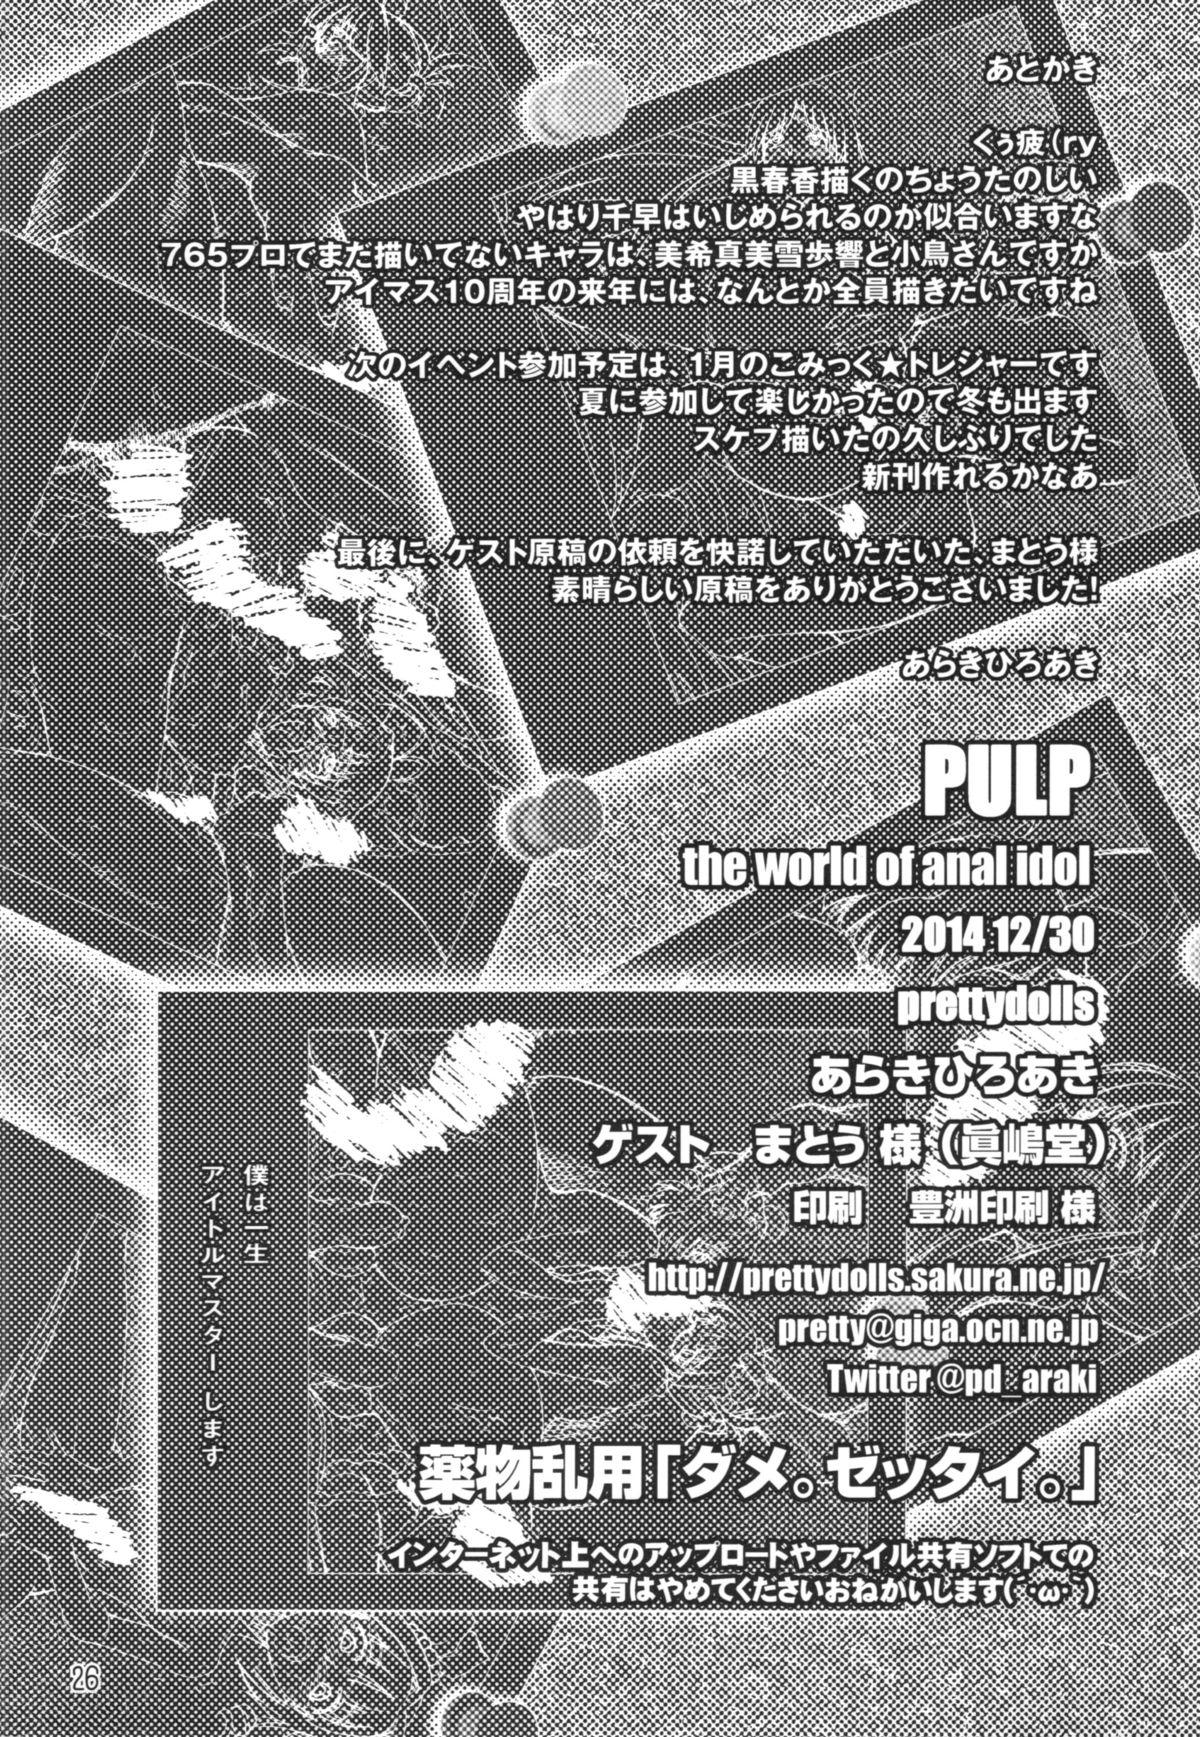 PULP the world of anal idol 25